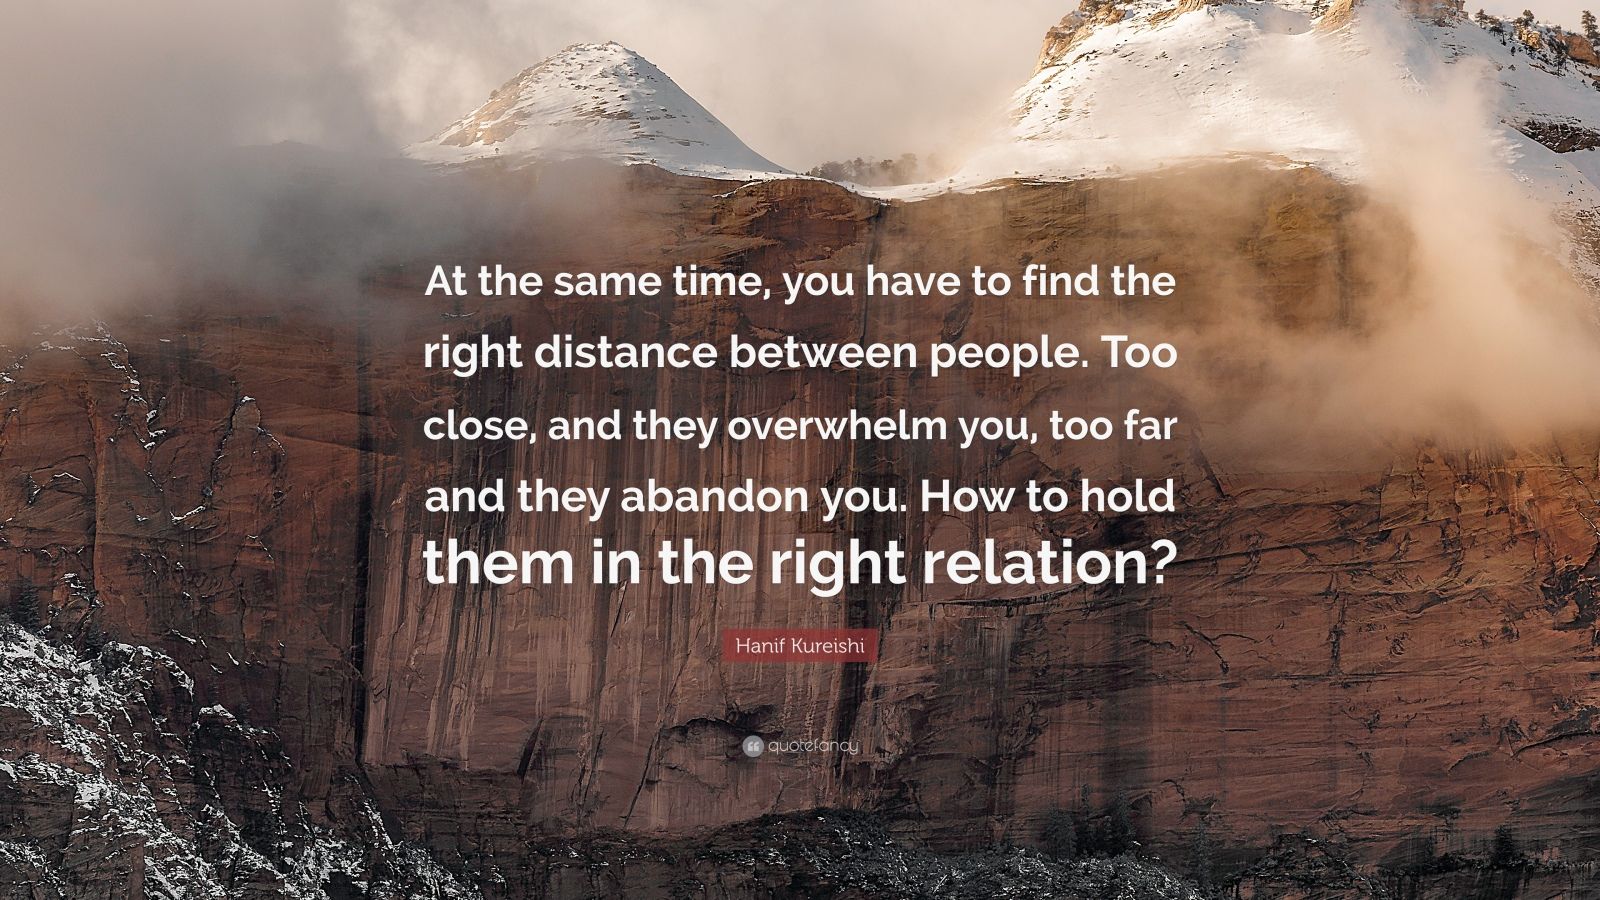 Hanif Kureishi Quote: “At the same time, you have to find the right ...